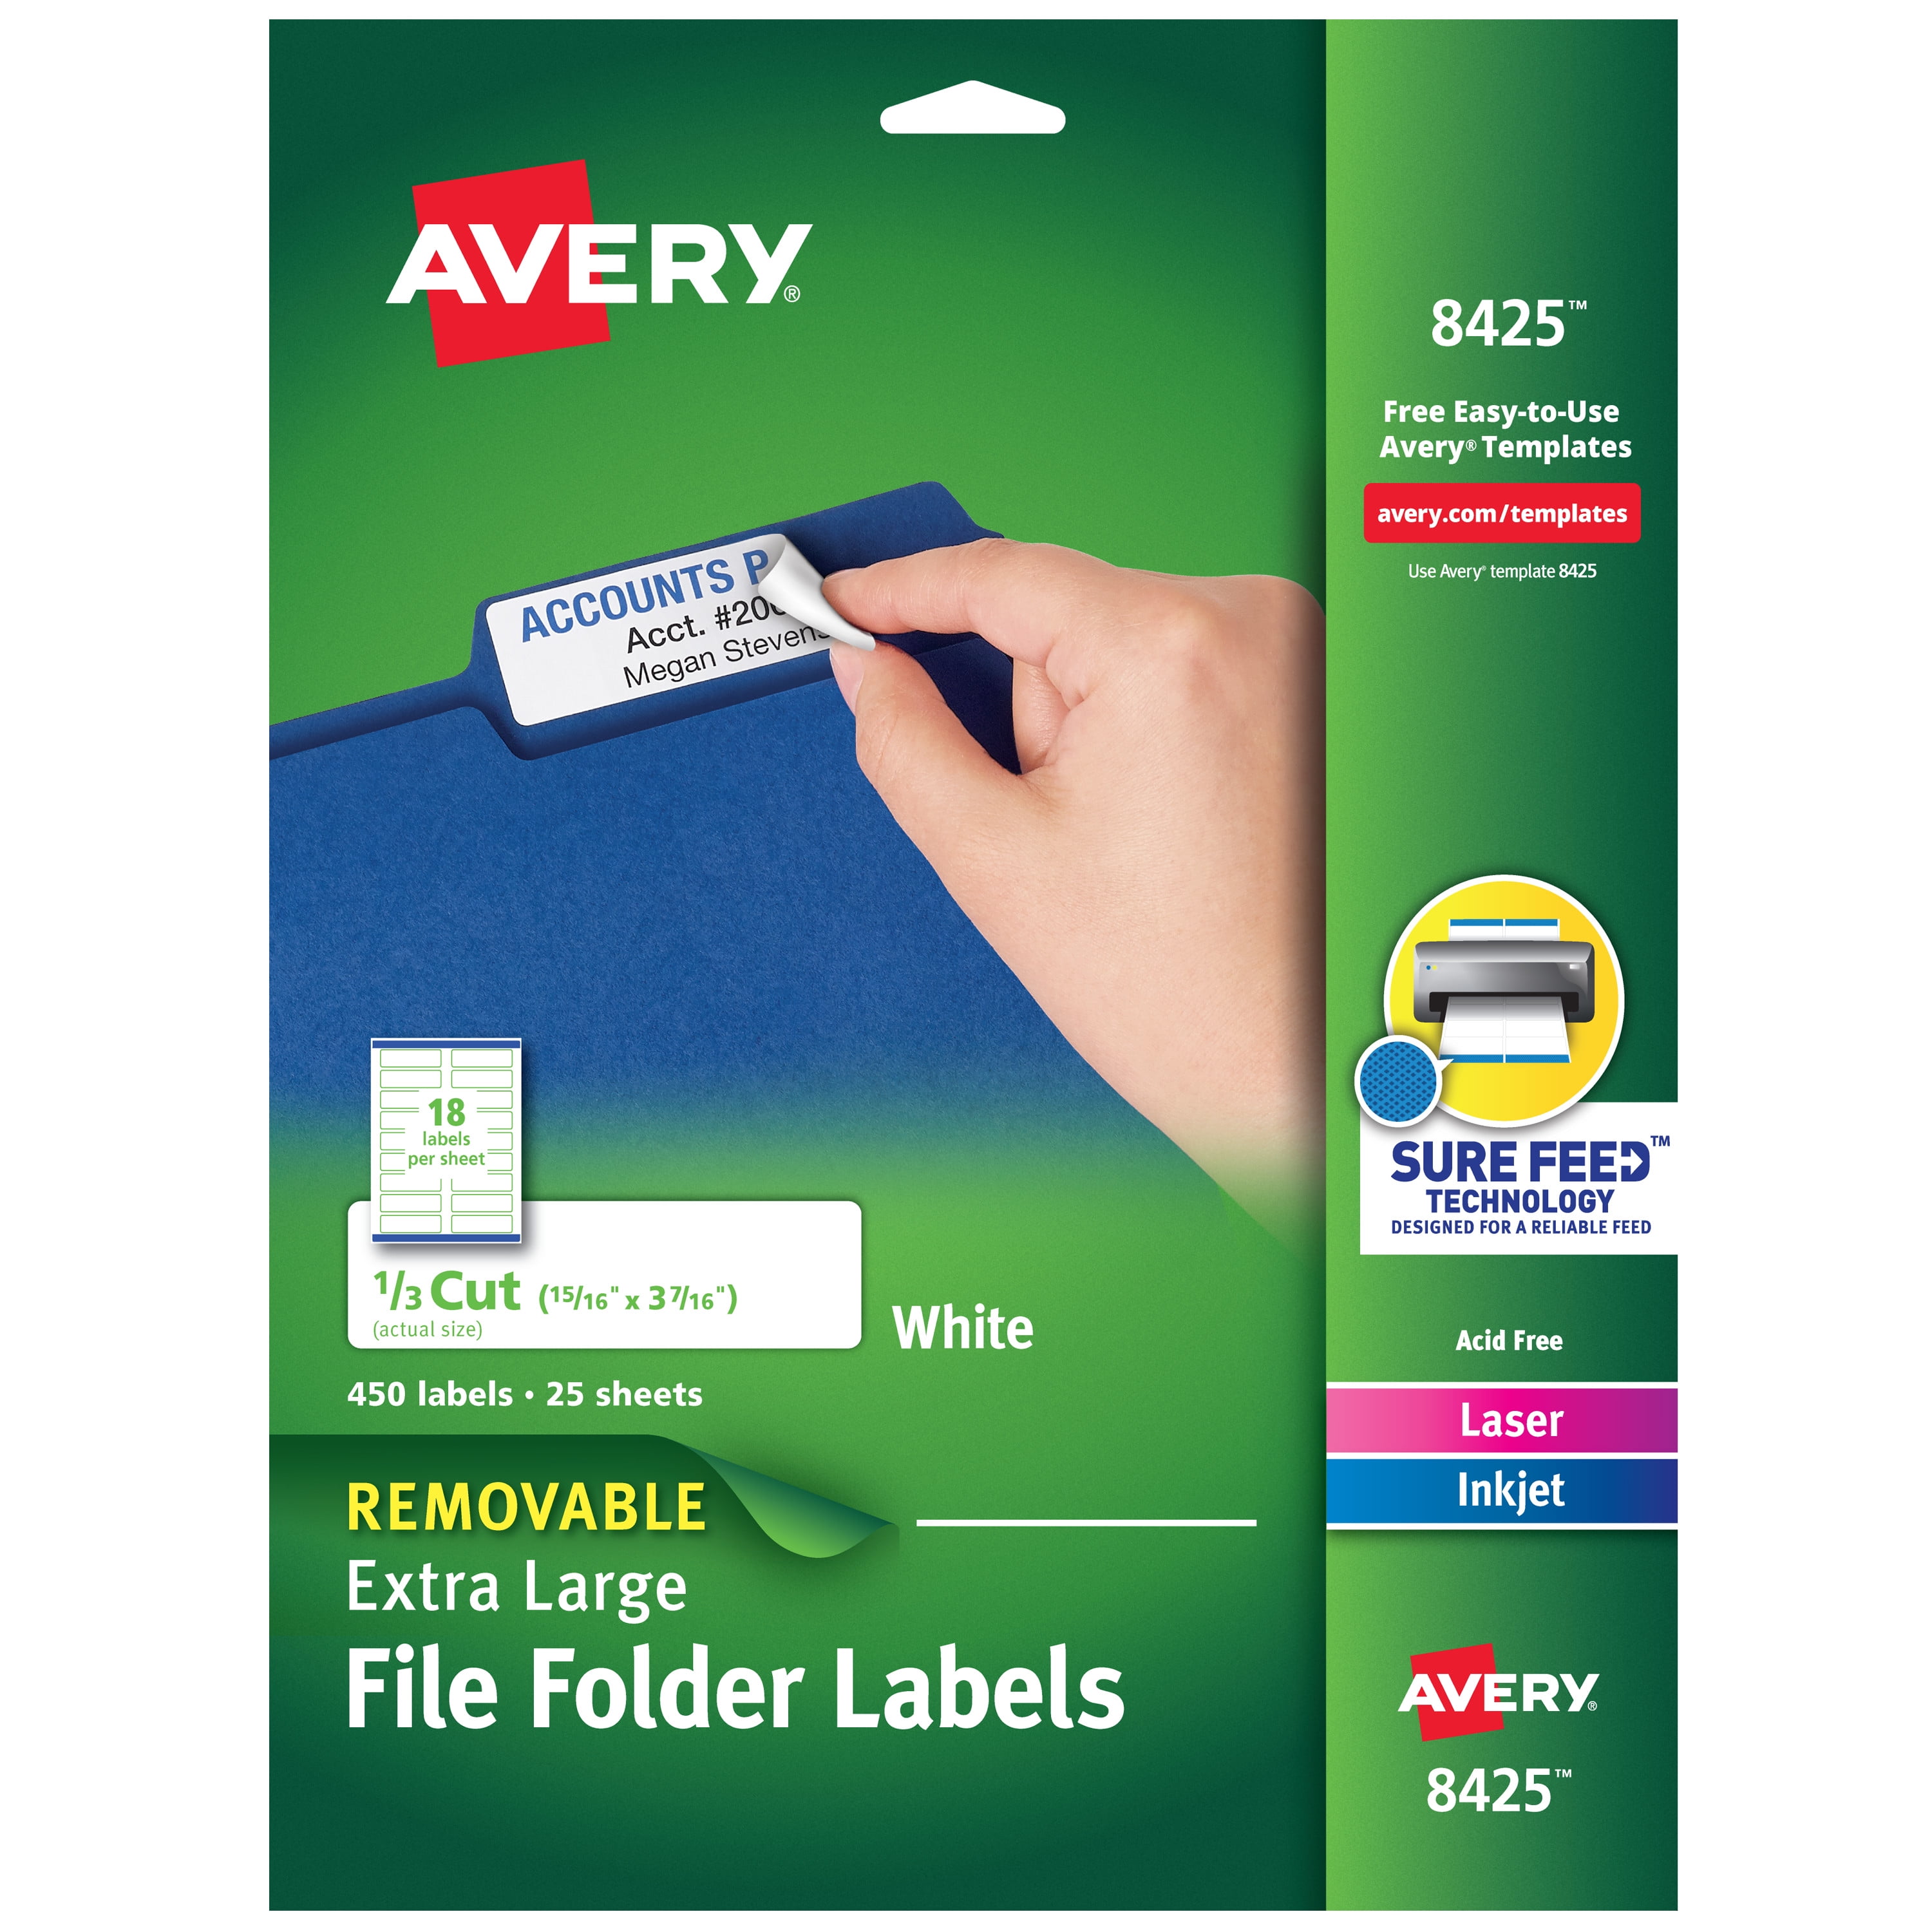 Avery Removable File Folder Labels, 15/16” x 37/16” 450 Labels (8425